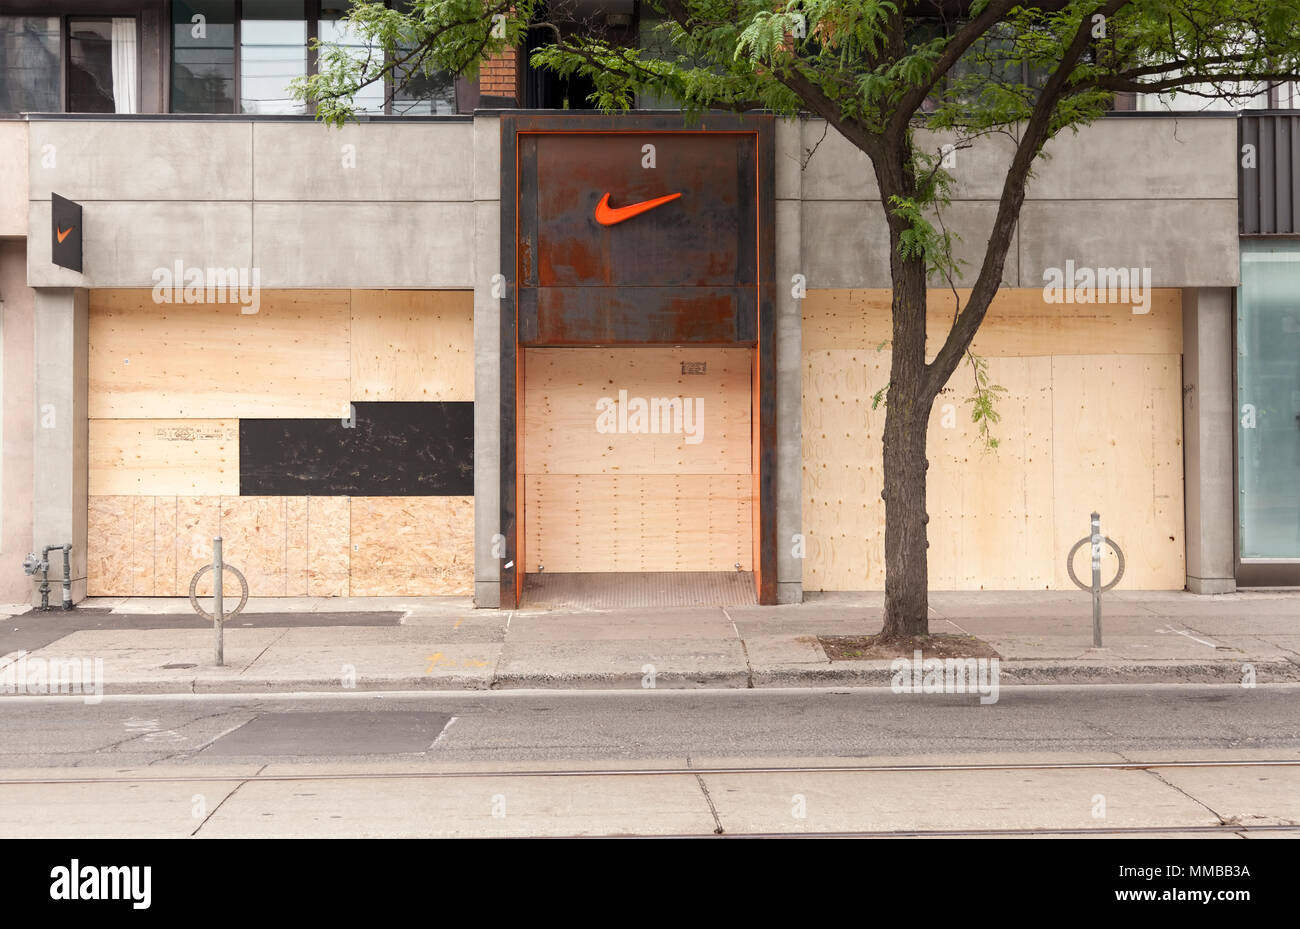 The Nike store with boarded up windows during the G20 summit in Downtown Toronto, Ontario, Canada. Stock Photo